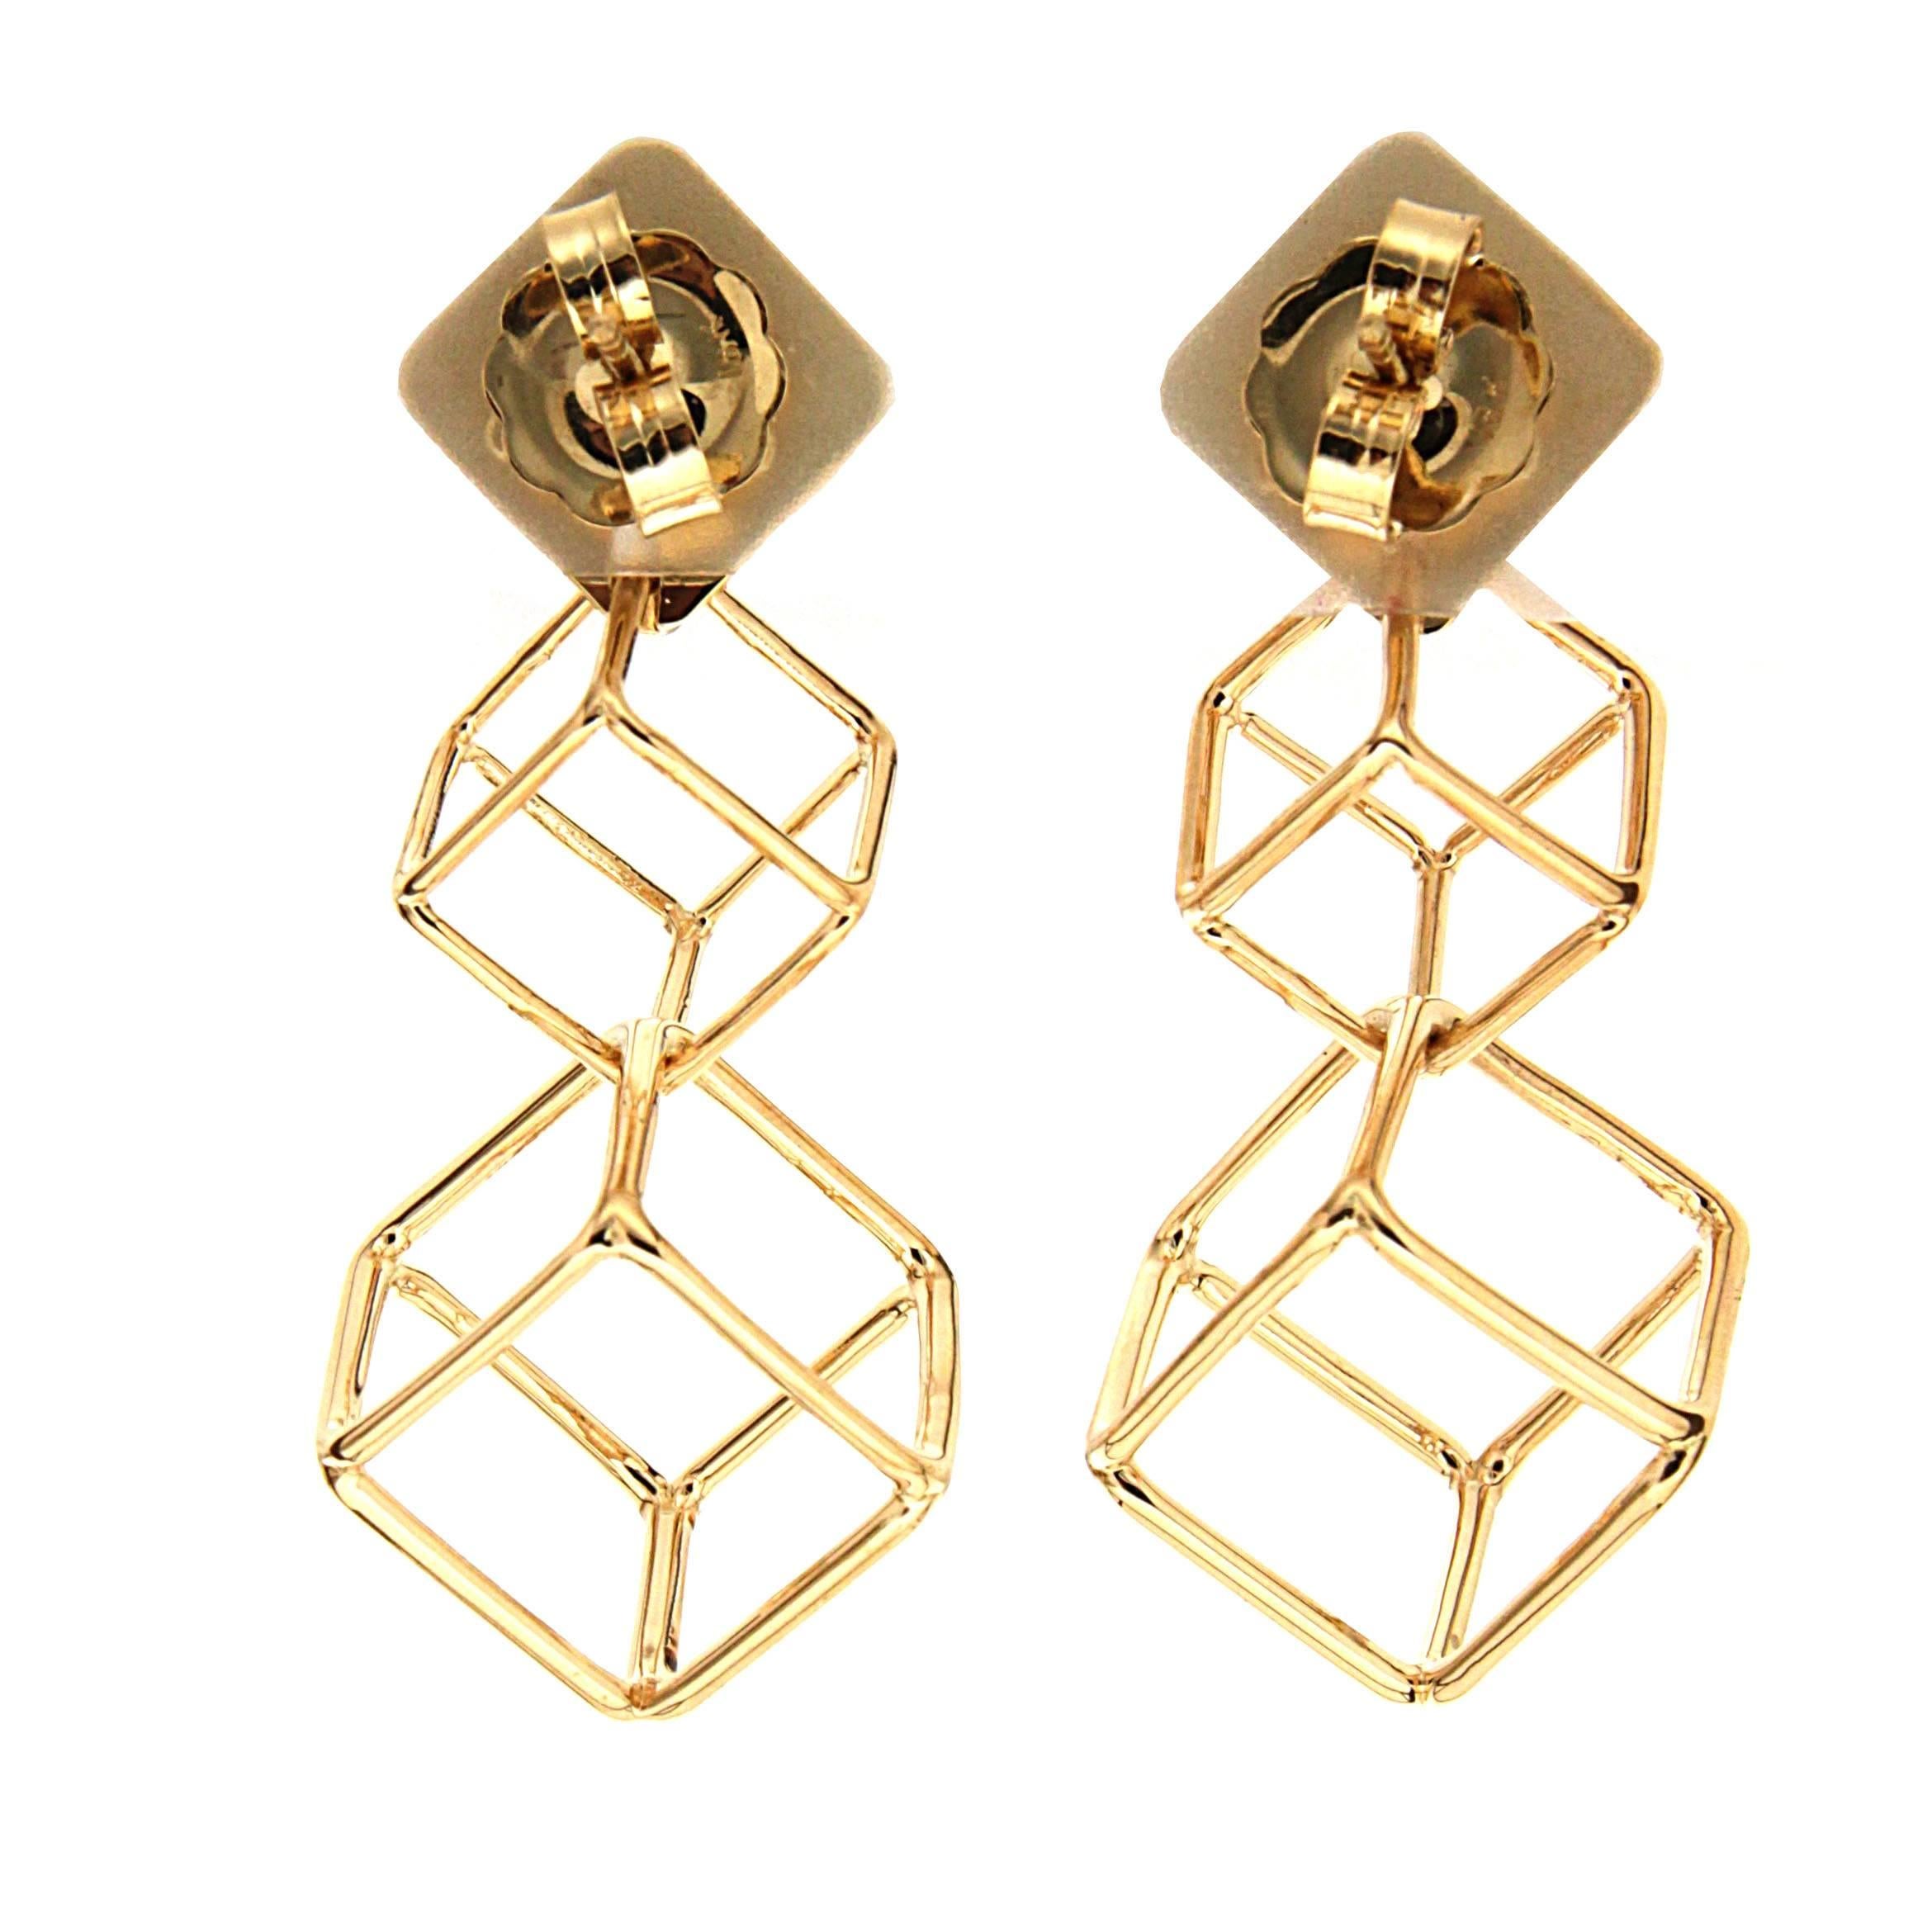 This pair of Cushion Cube dangling Earrings features two cubes and is finished in 18kt Yellow gold with jumbo friction backs